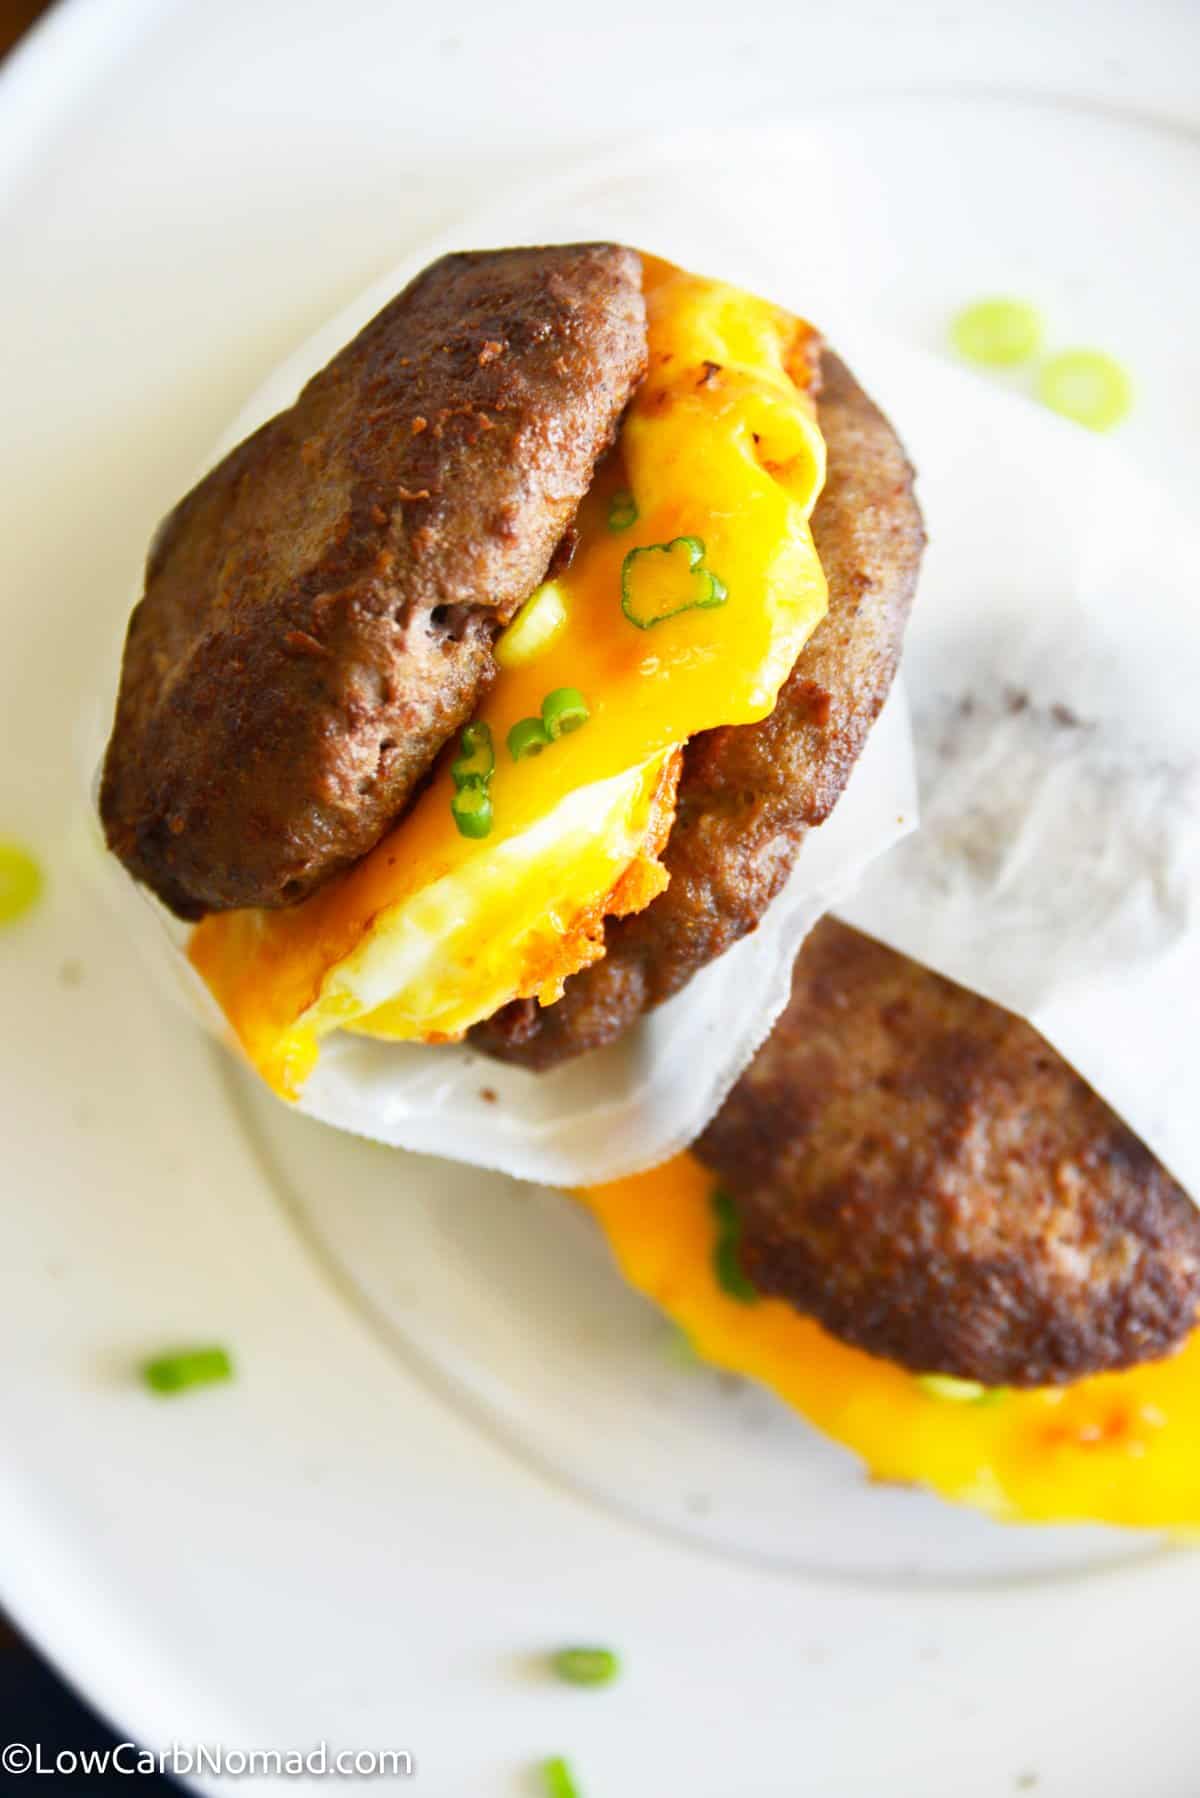 https://www.lowcarbnomad.com/wp-content/uploads/2022/07/Keto-Sausage-Egg-and-Cheese-Breakfast-Sandwiches-34.jpg